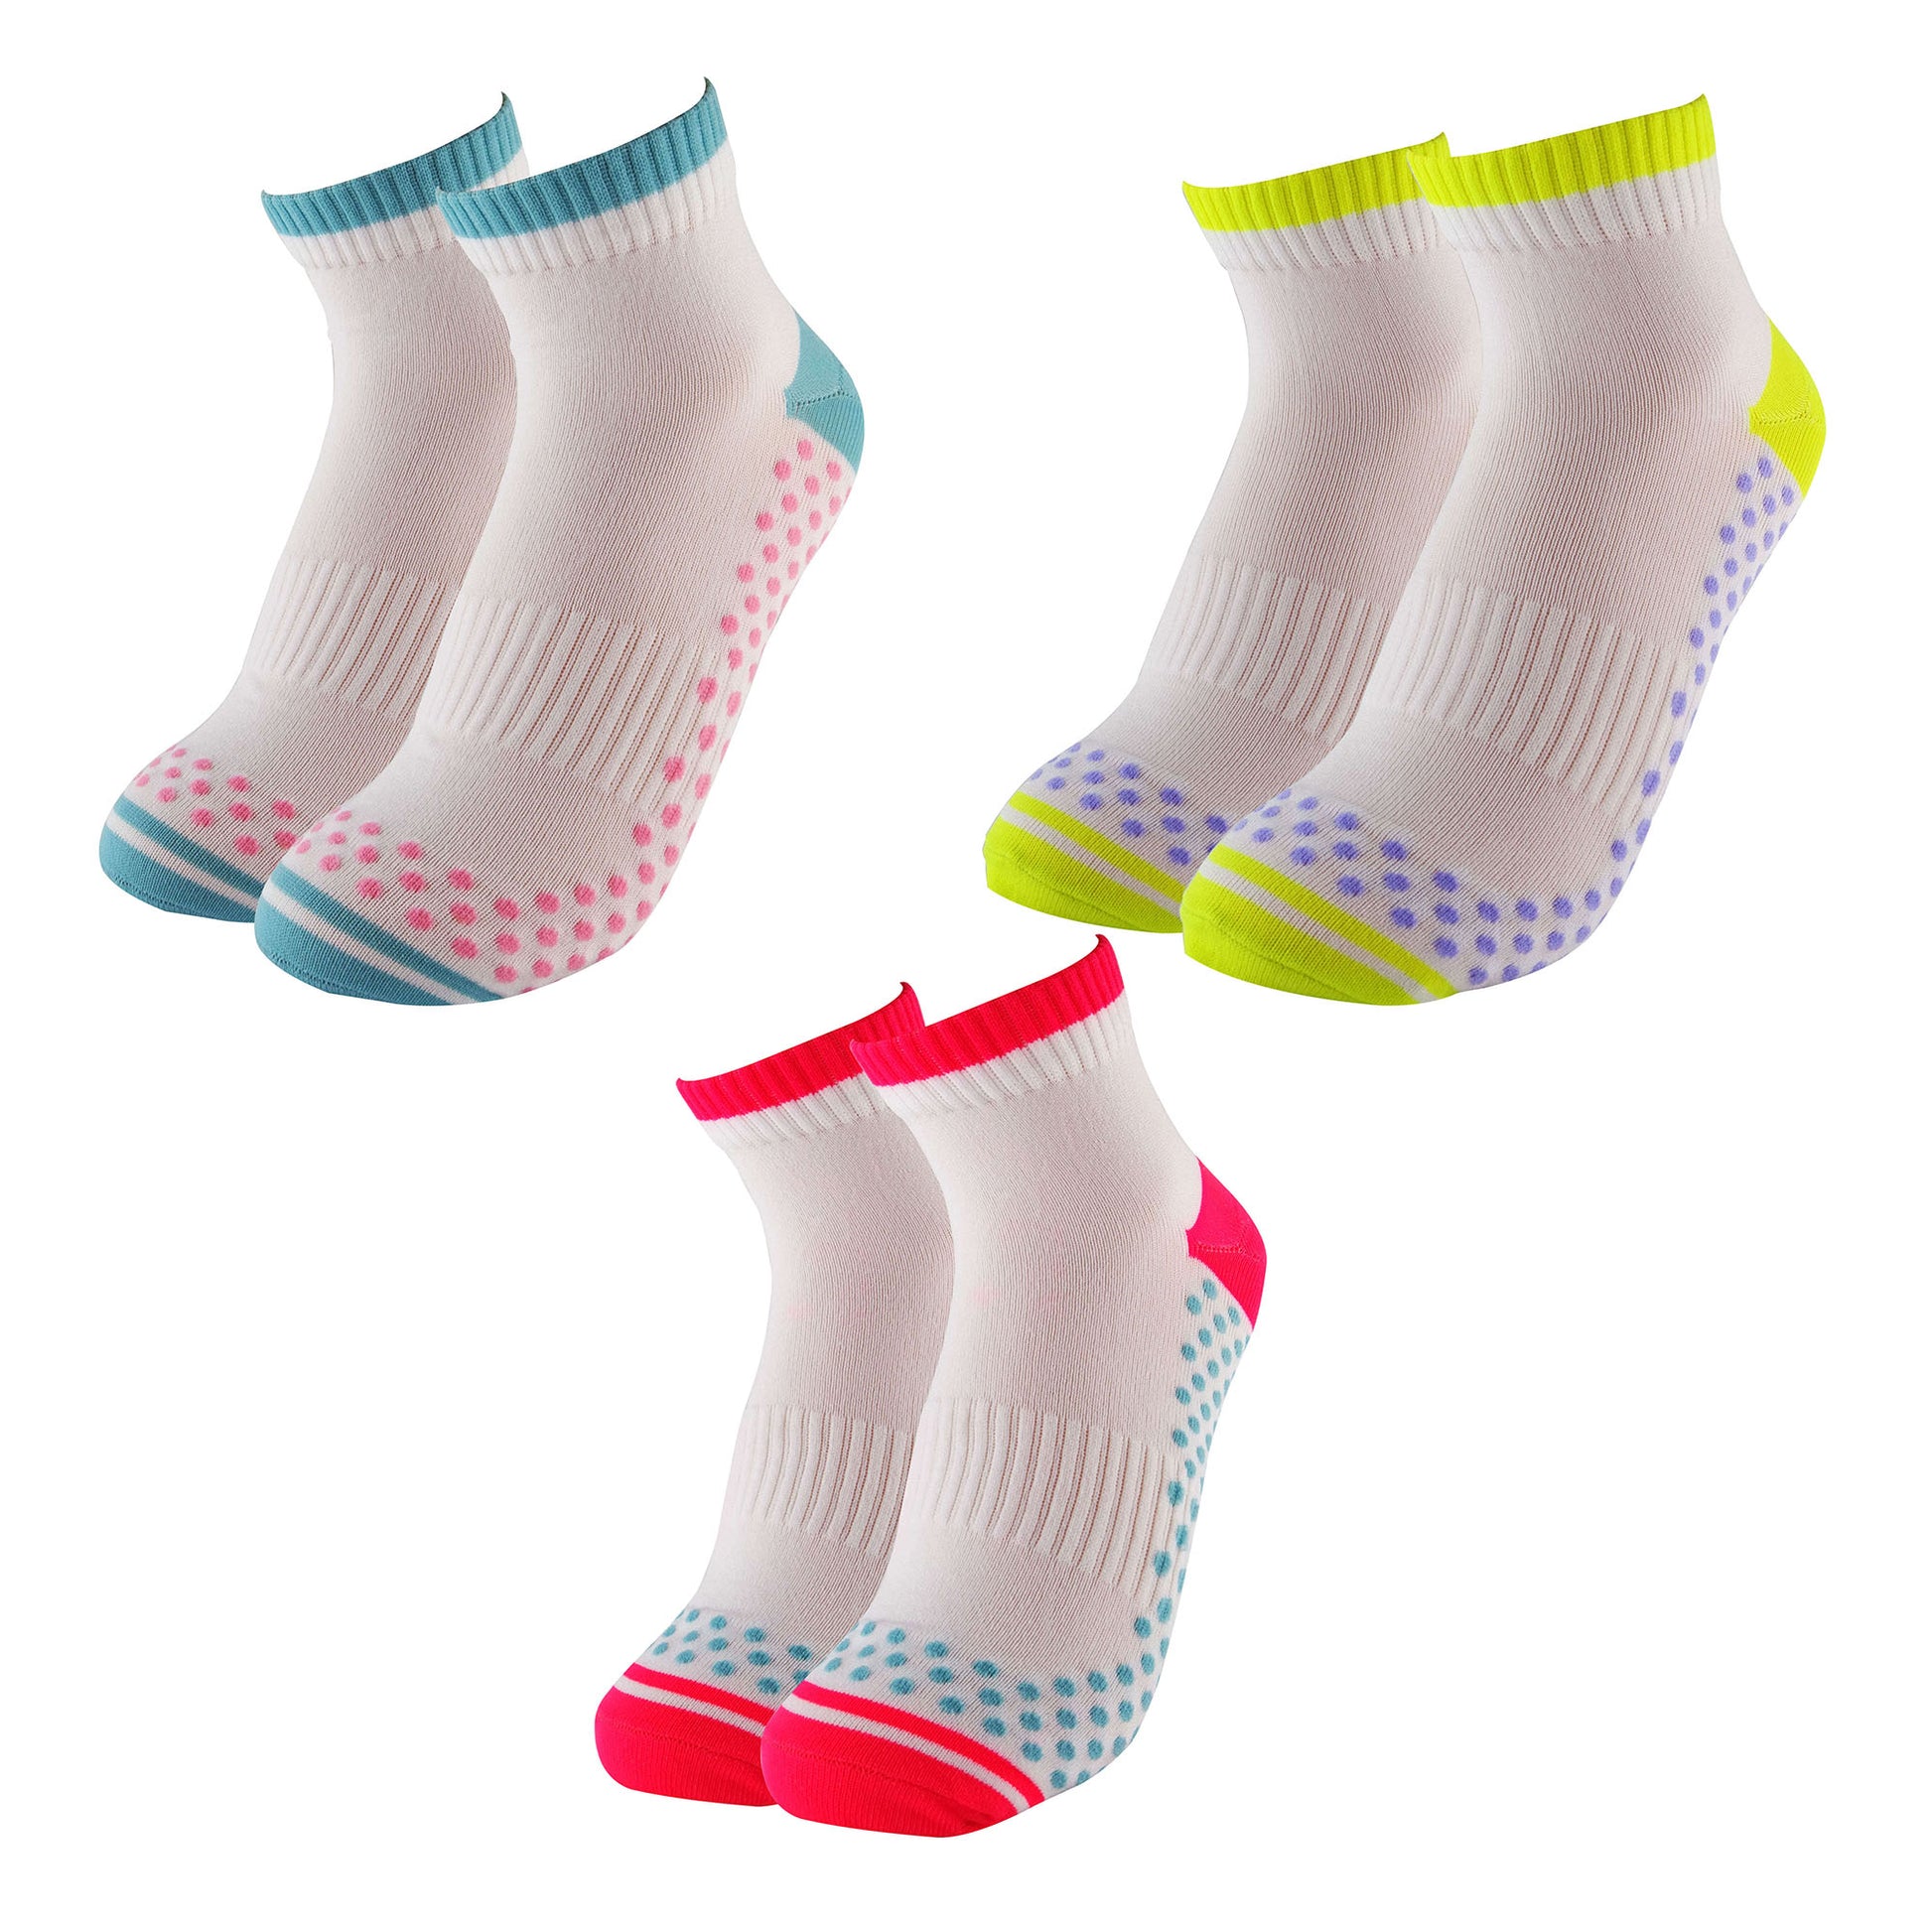 women's low cut grip performance socks, designed to provide traction and support during active pursuits